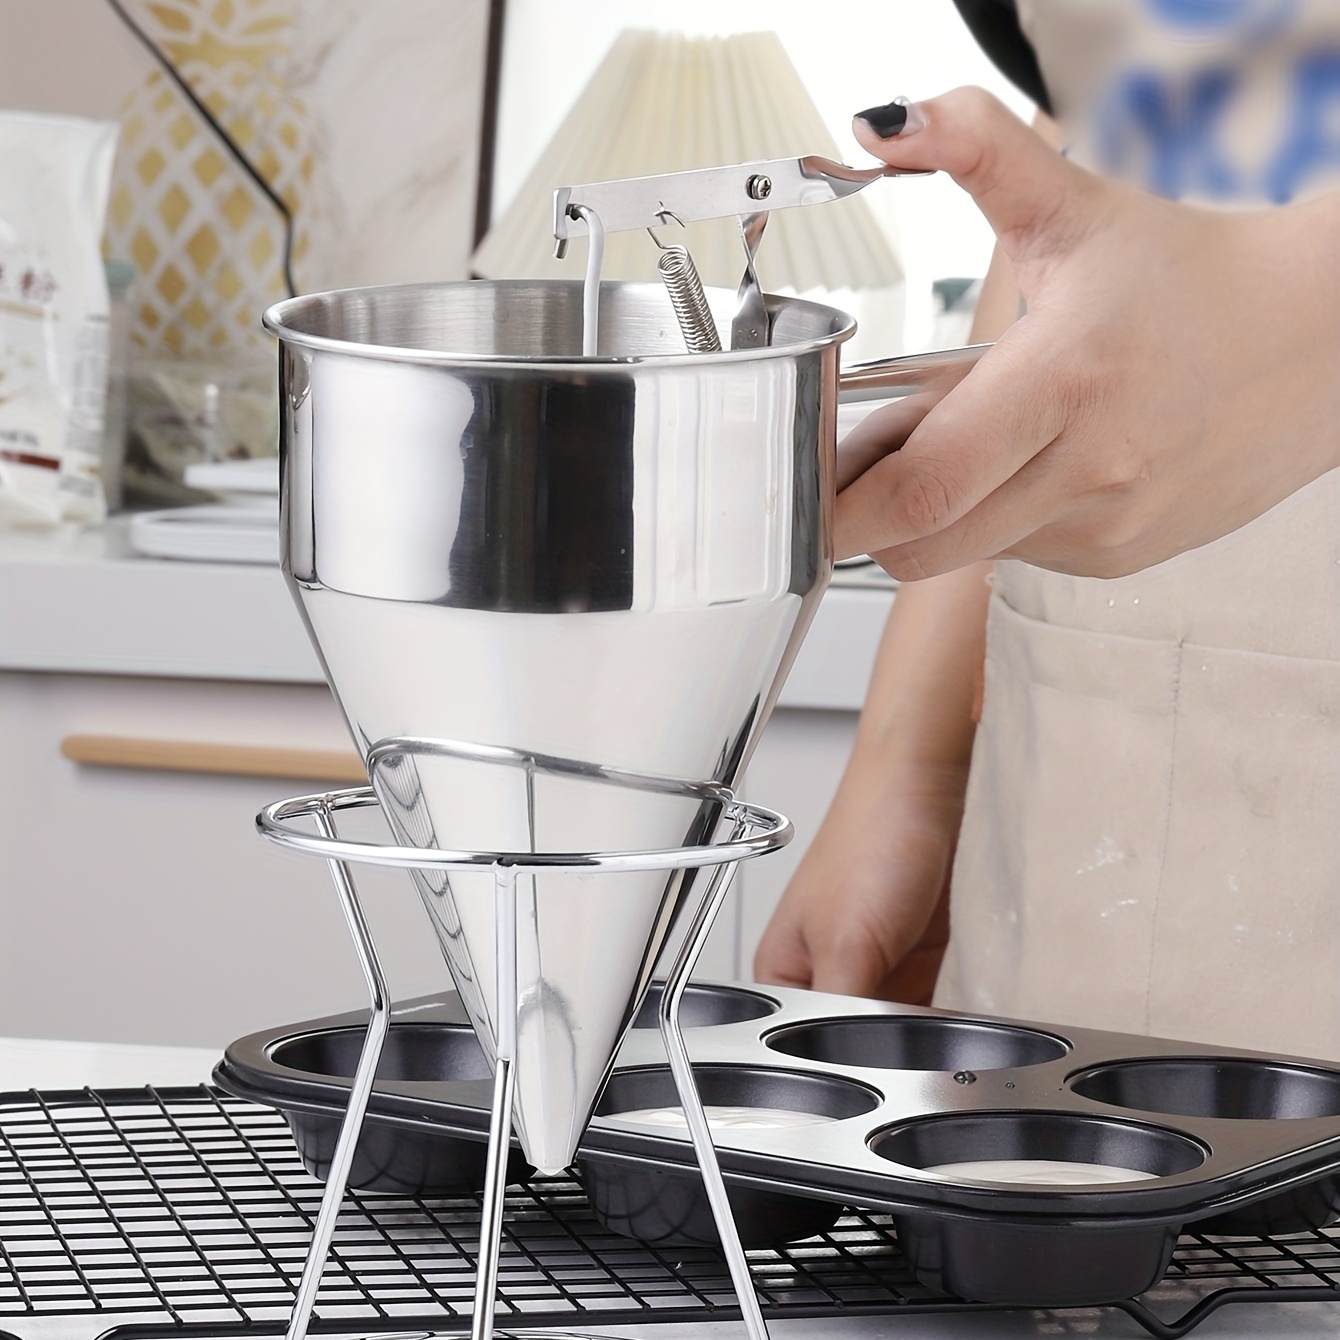 Pancake Batter Dispenser, Multi-caliber Stainless Steel Funnel Cake  Dispenser with Stand Great for Pancakes, Cupcakes or Any Baked Goods